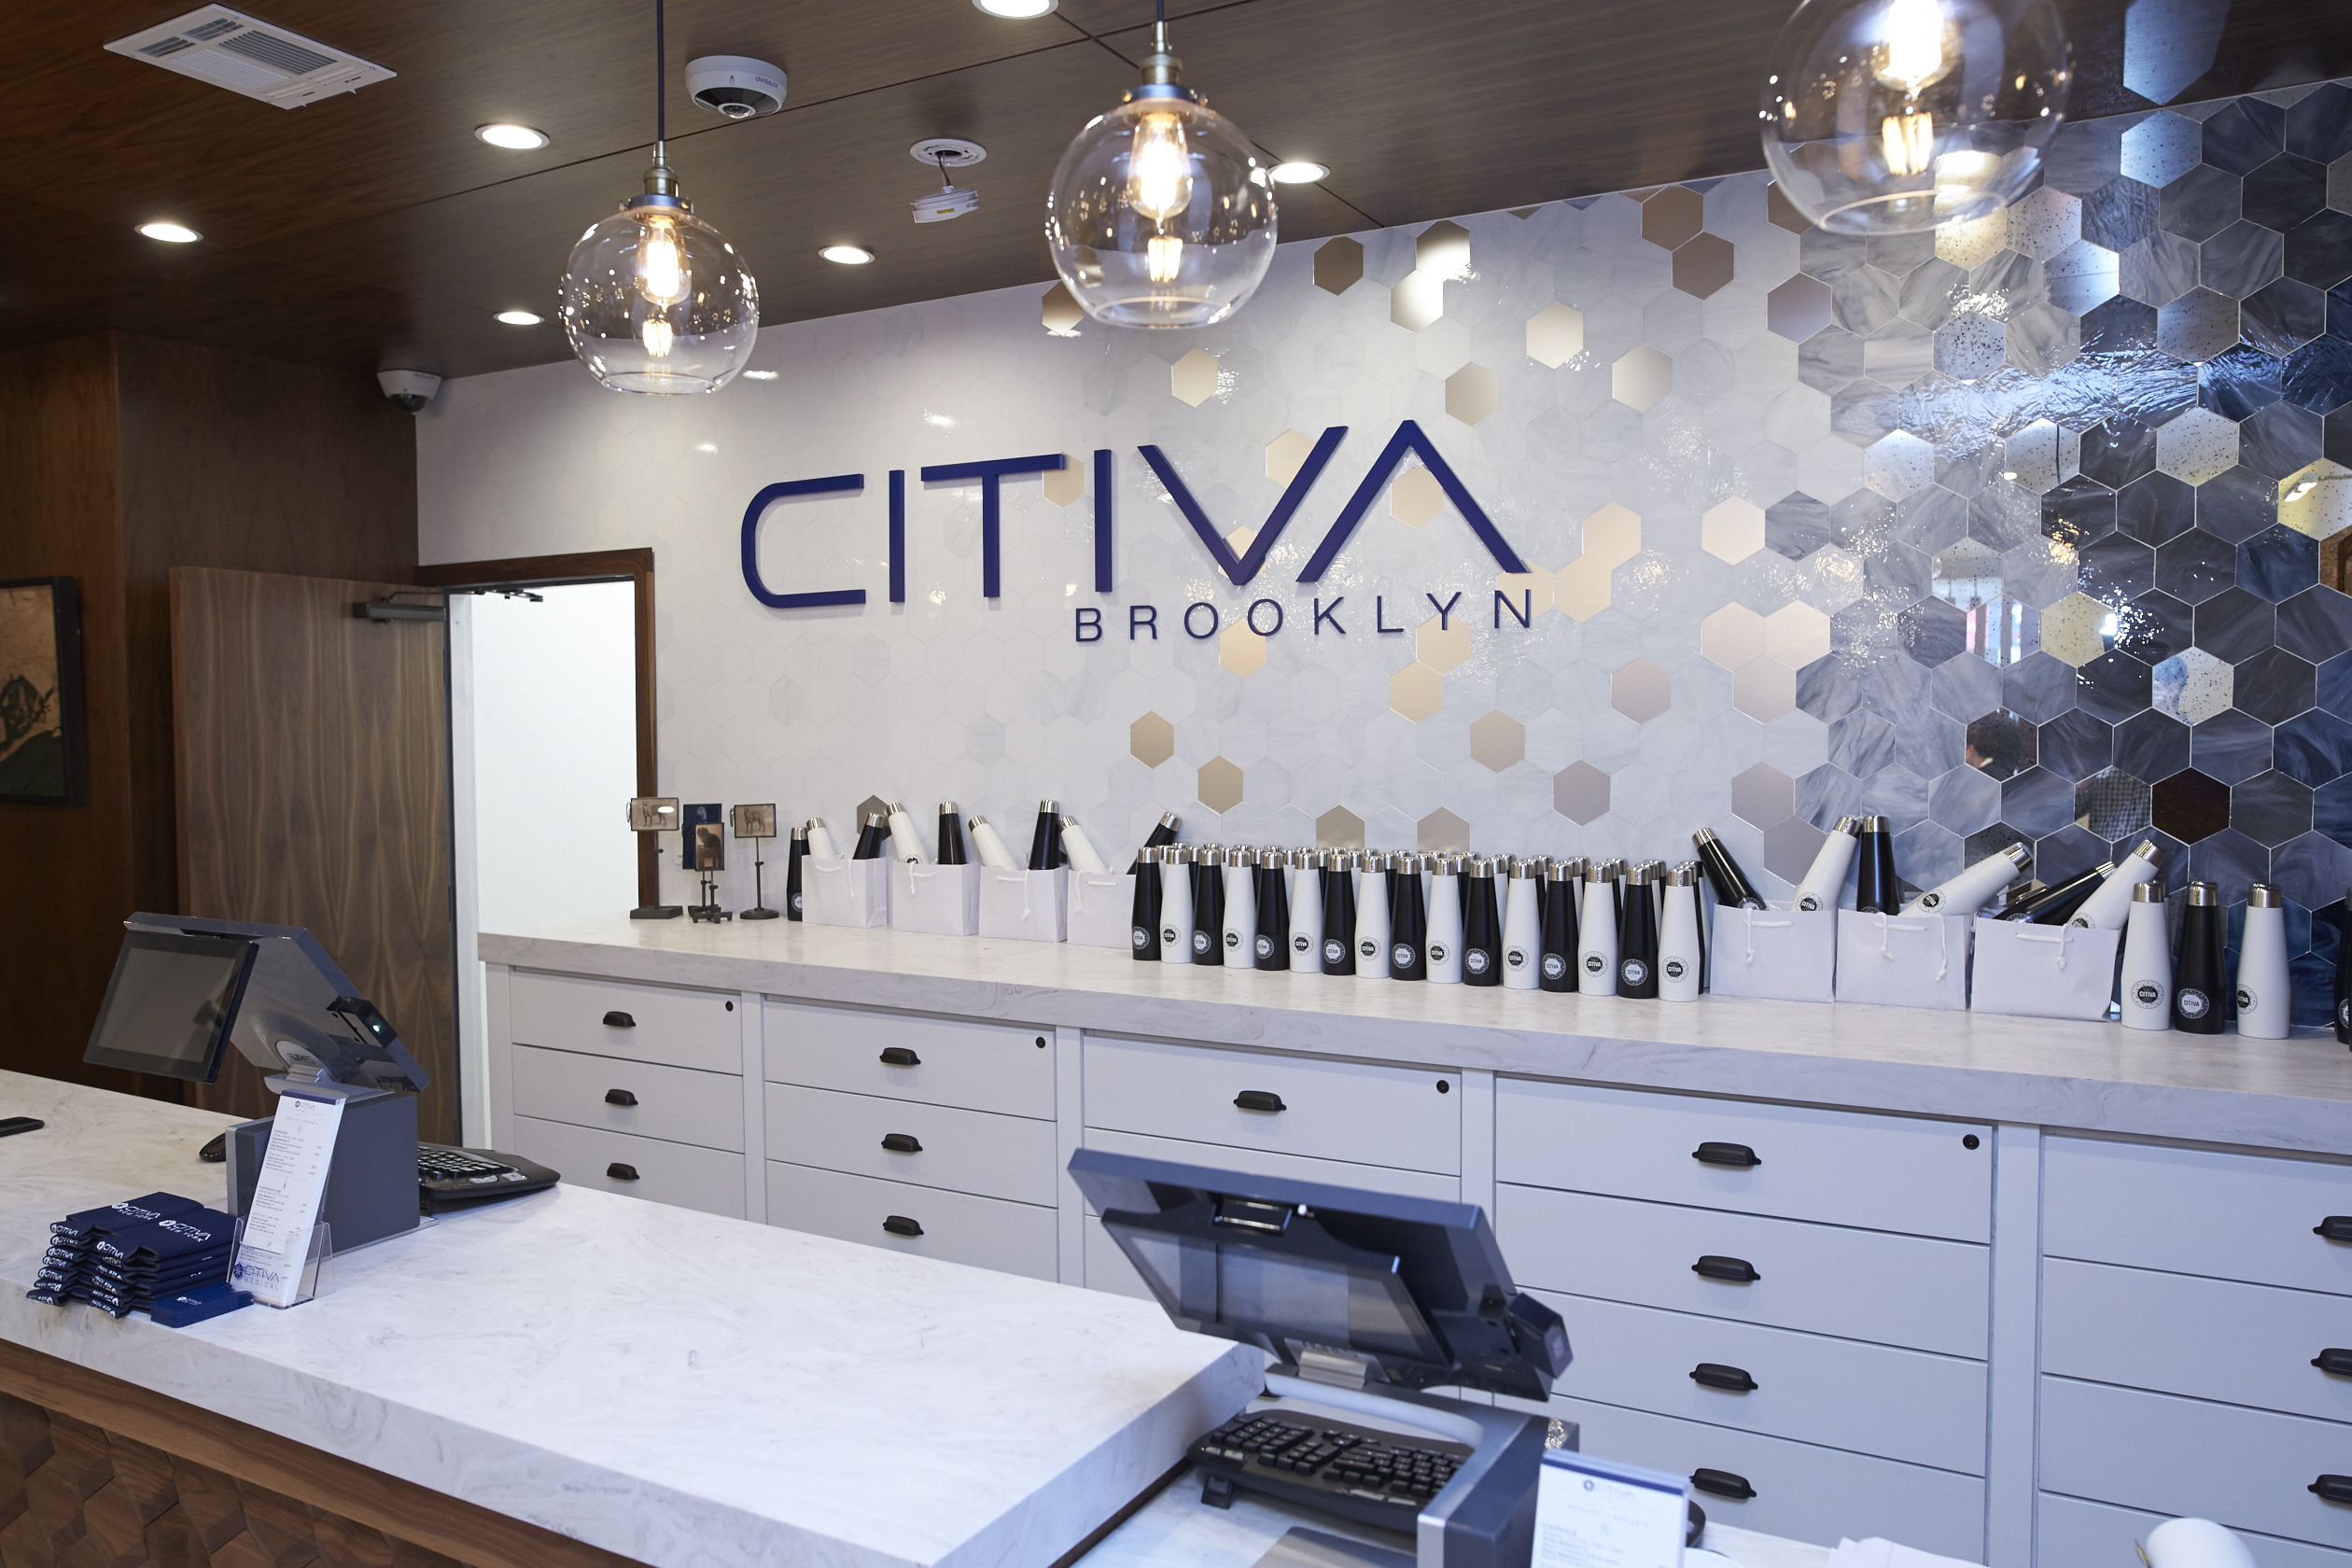 New York City's First Ever Medicinal Cannabis Dispensary Lands in Downtown Brooklyn